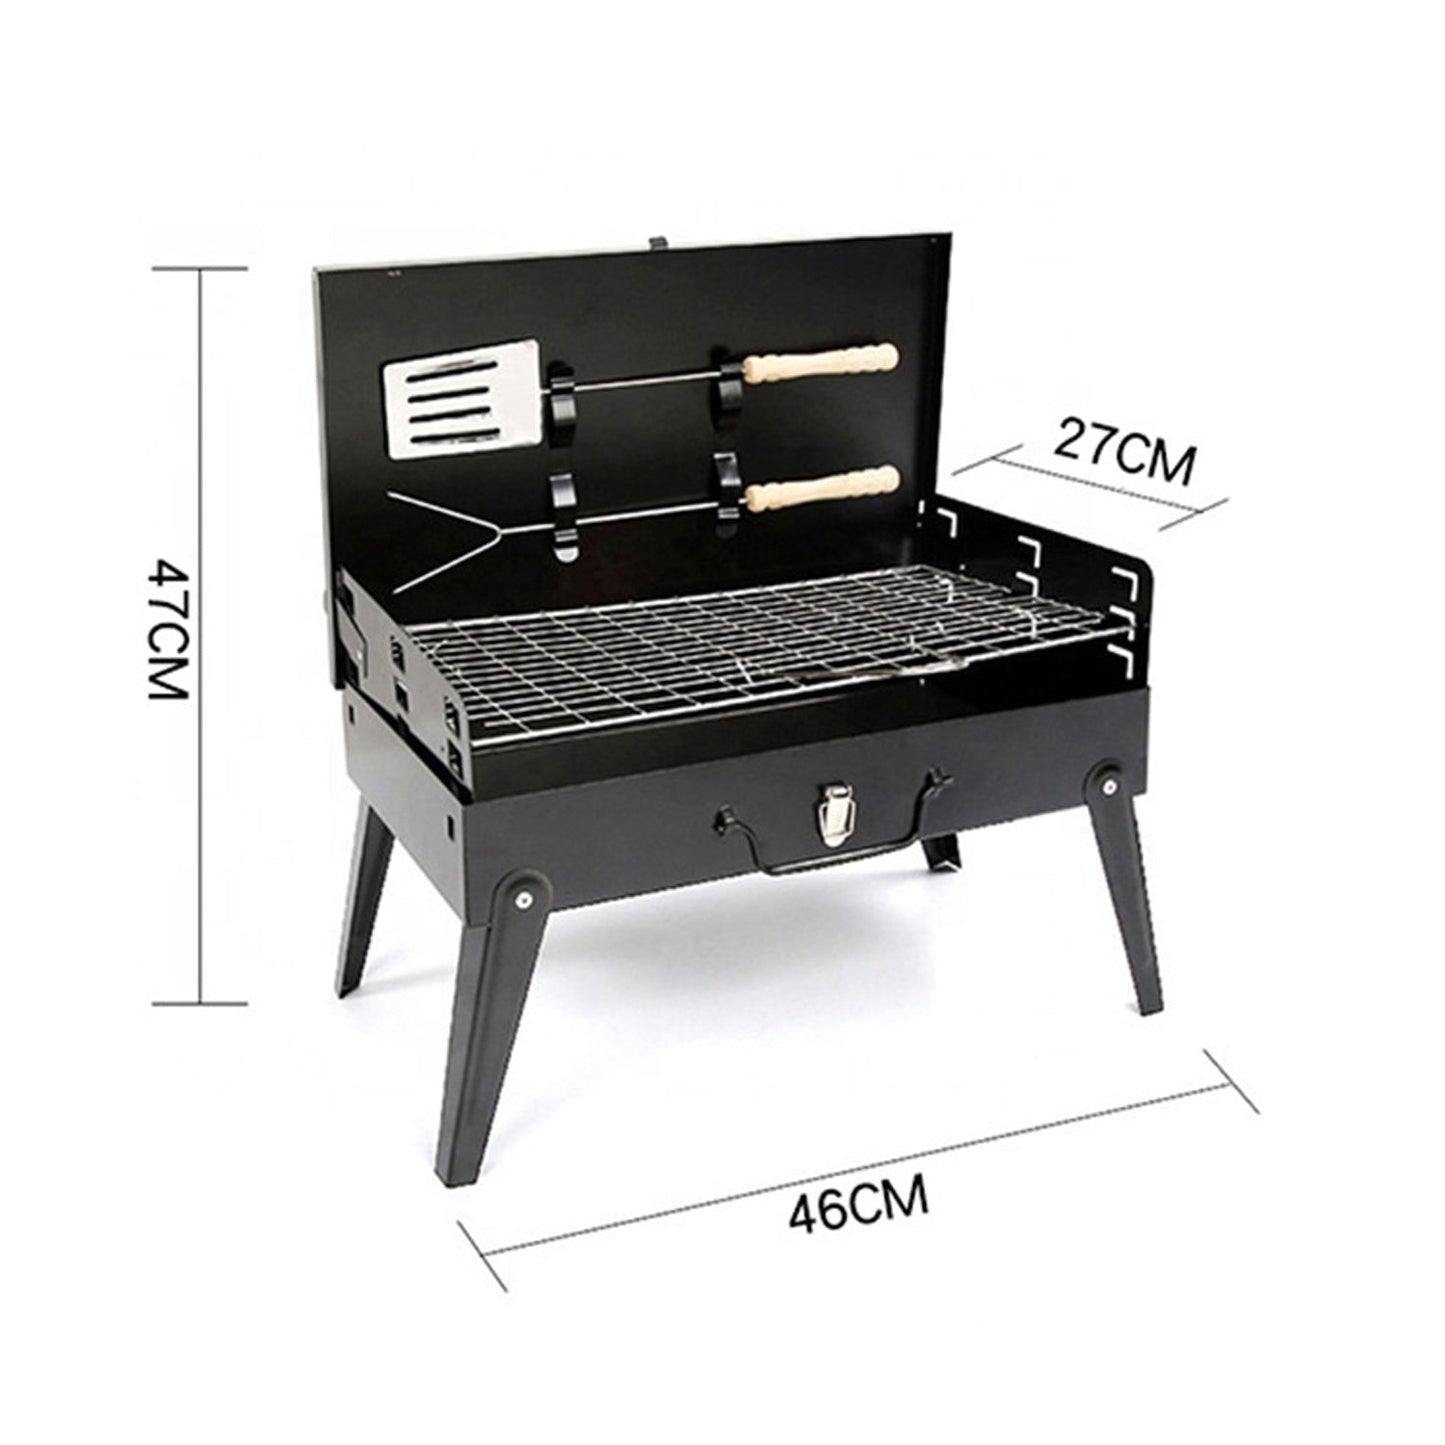 Stainless Steel Briefcase Style Barbecue Grill Toaster (Medium, Black) China